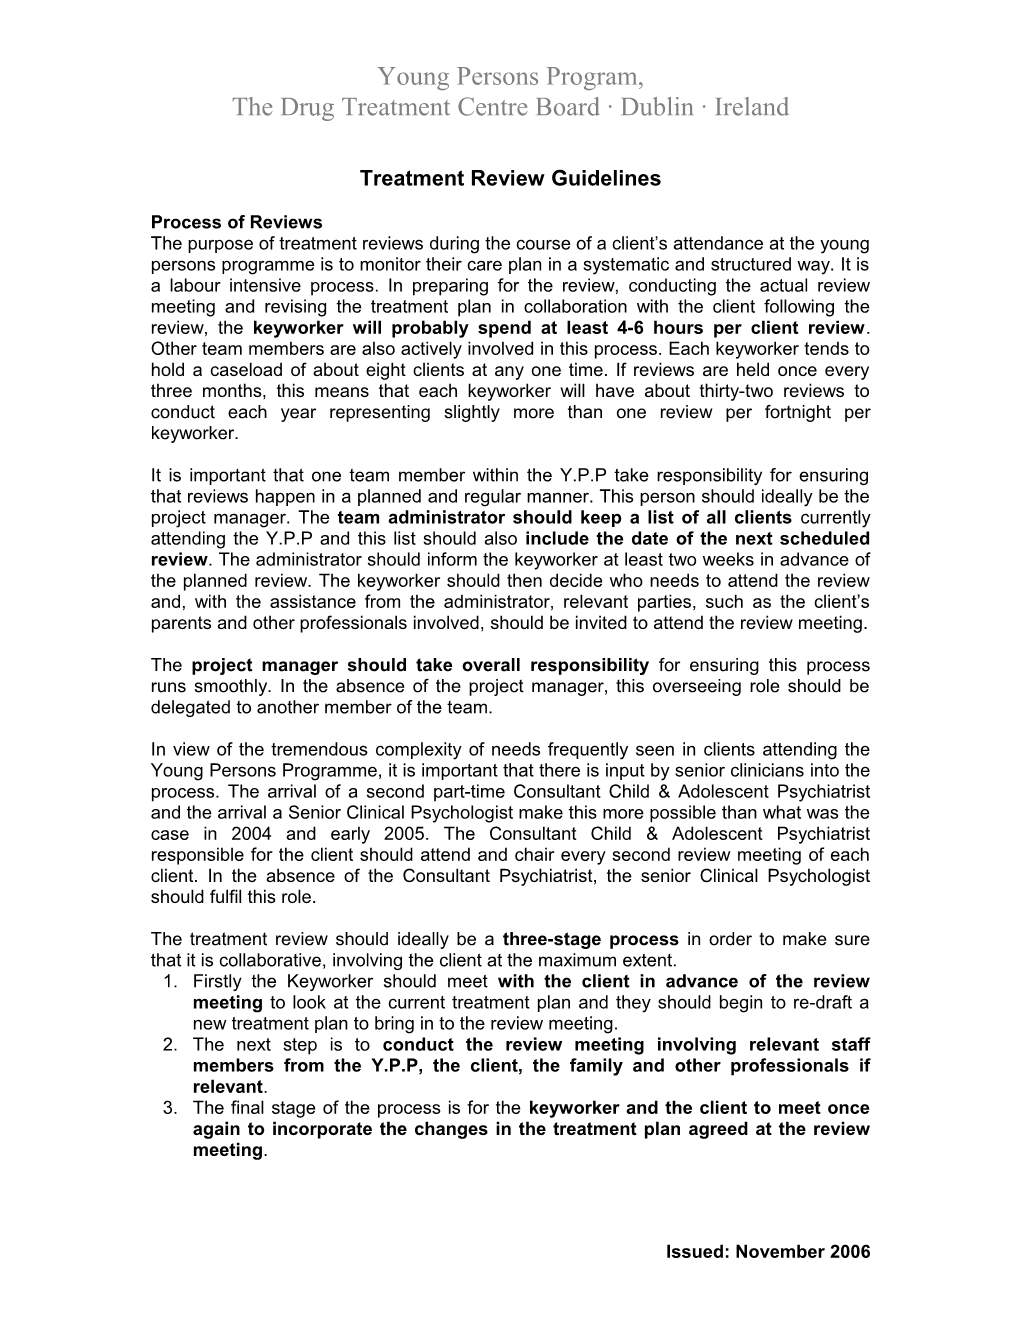 Treatment Review Guidelines